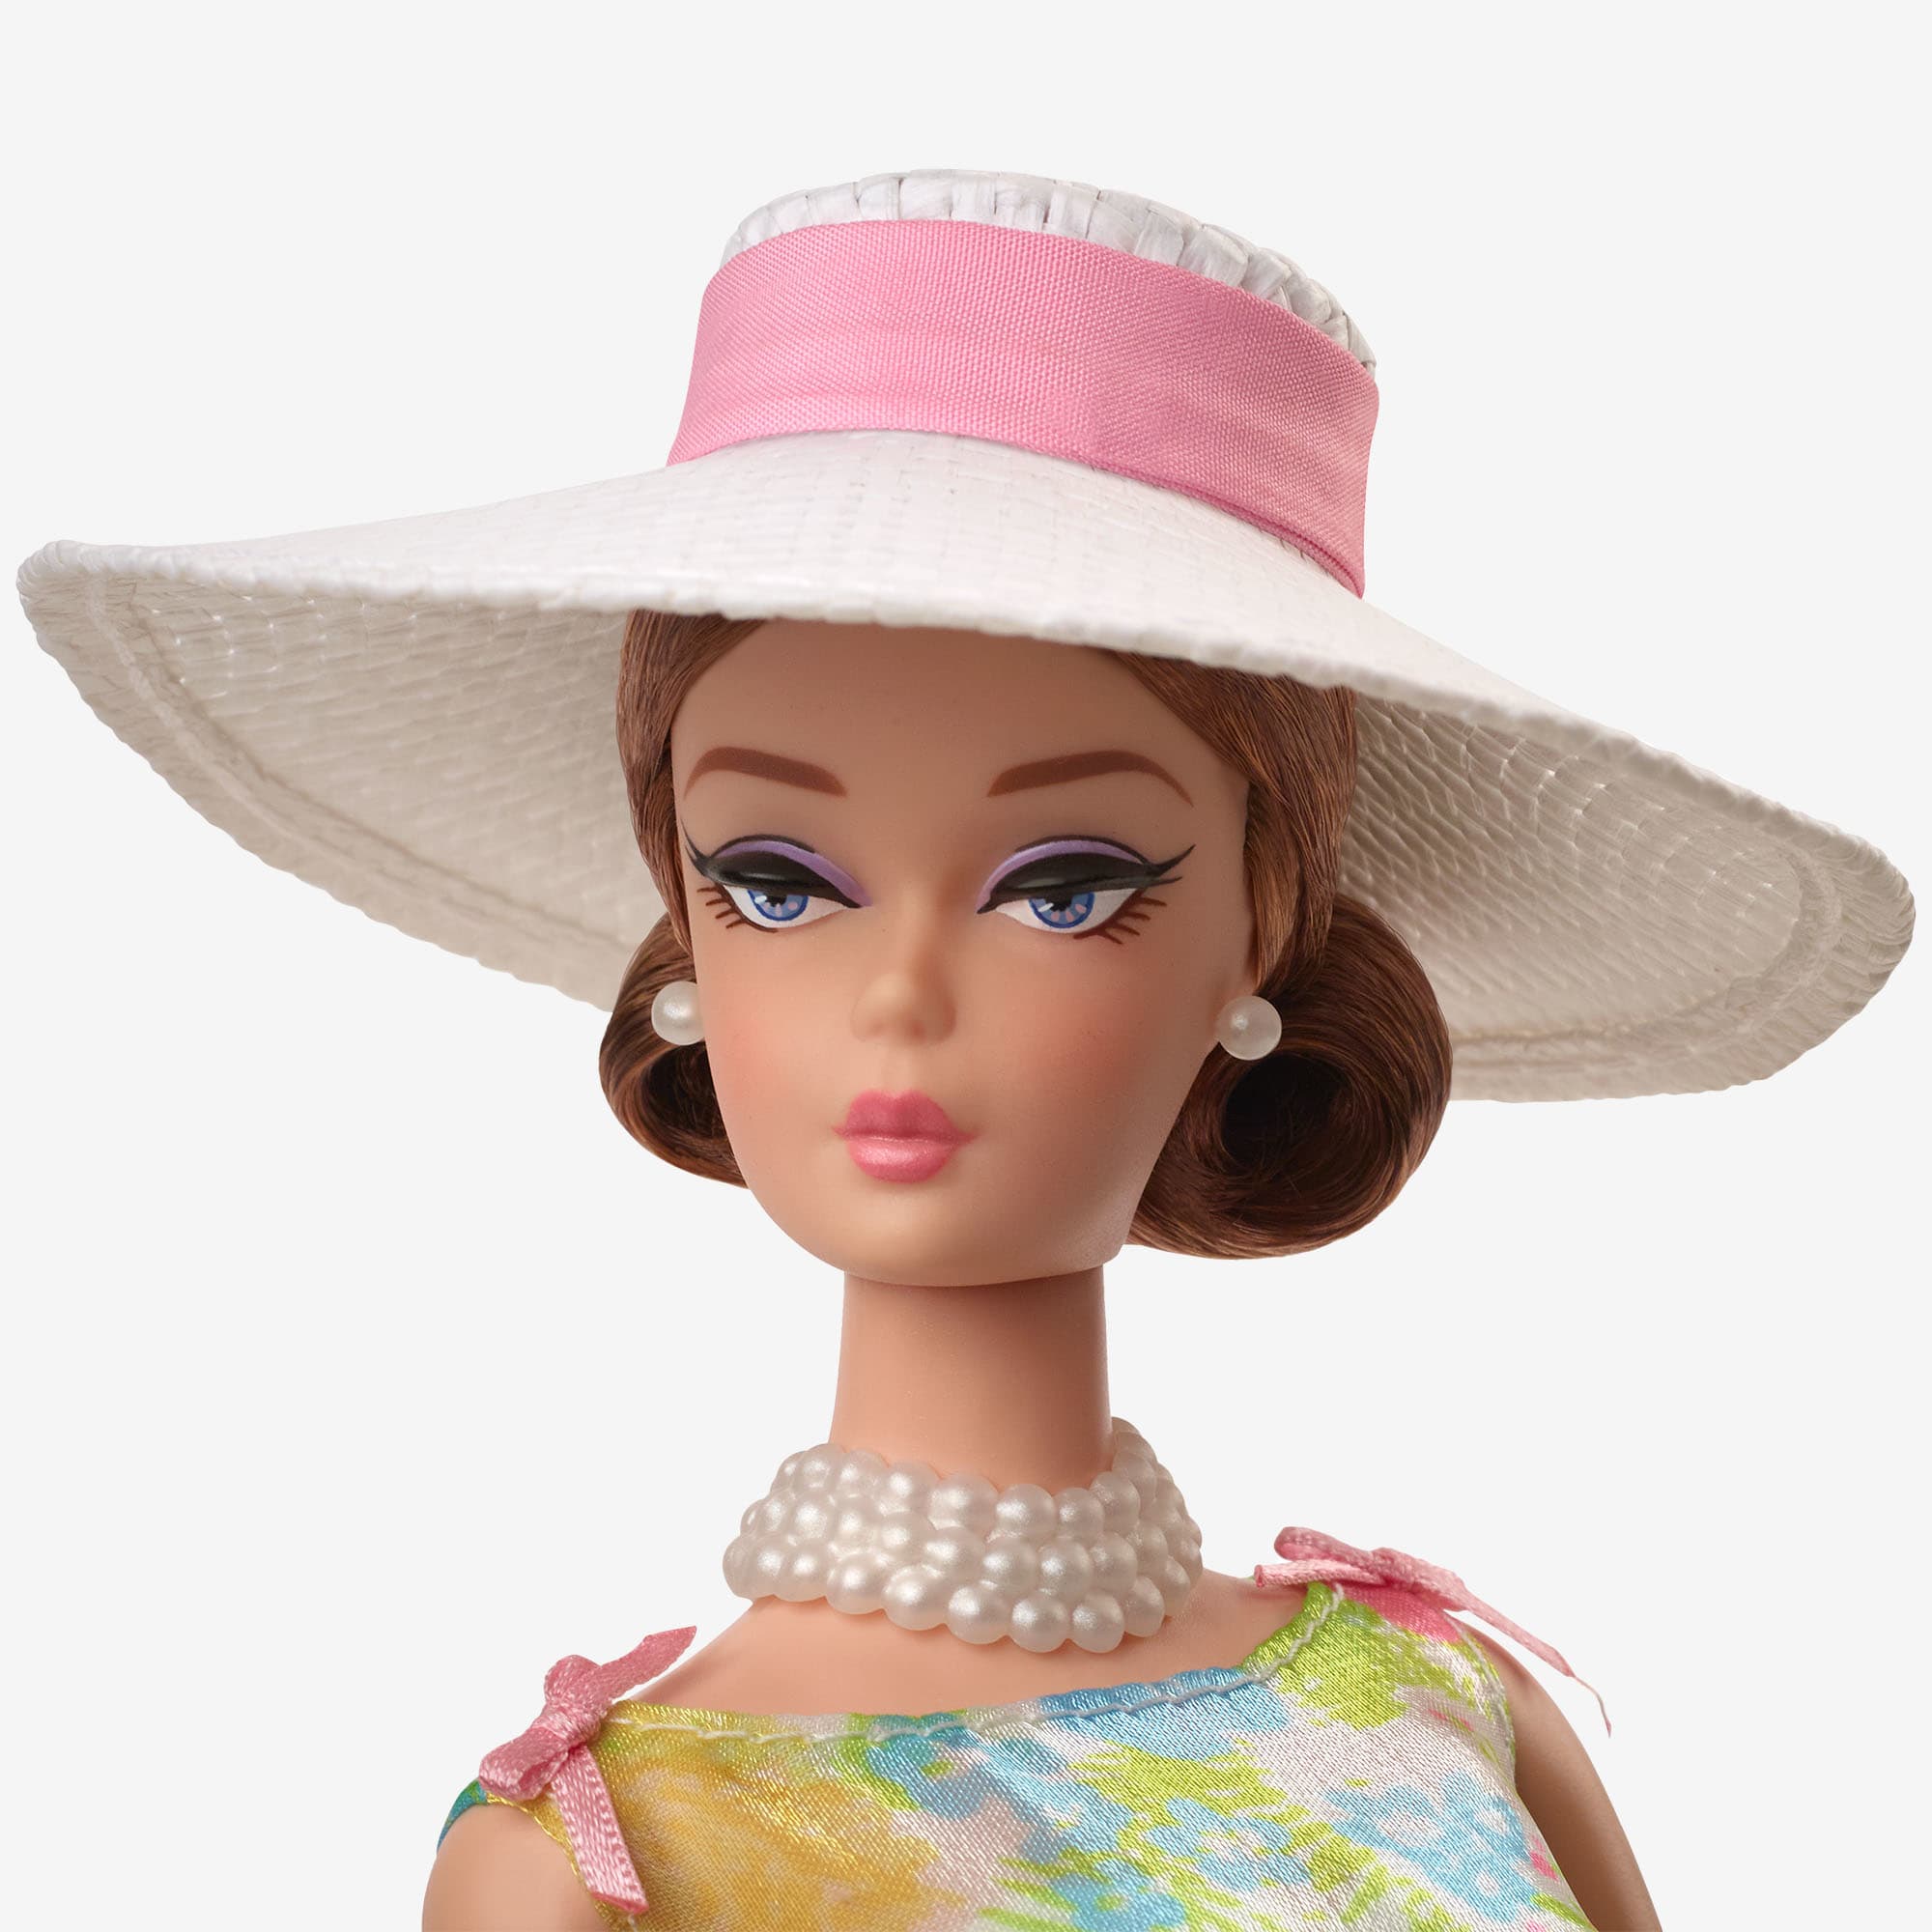 Barbie 12 Days of Spring Doll and Accessories